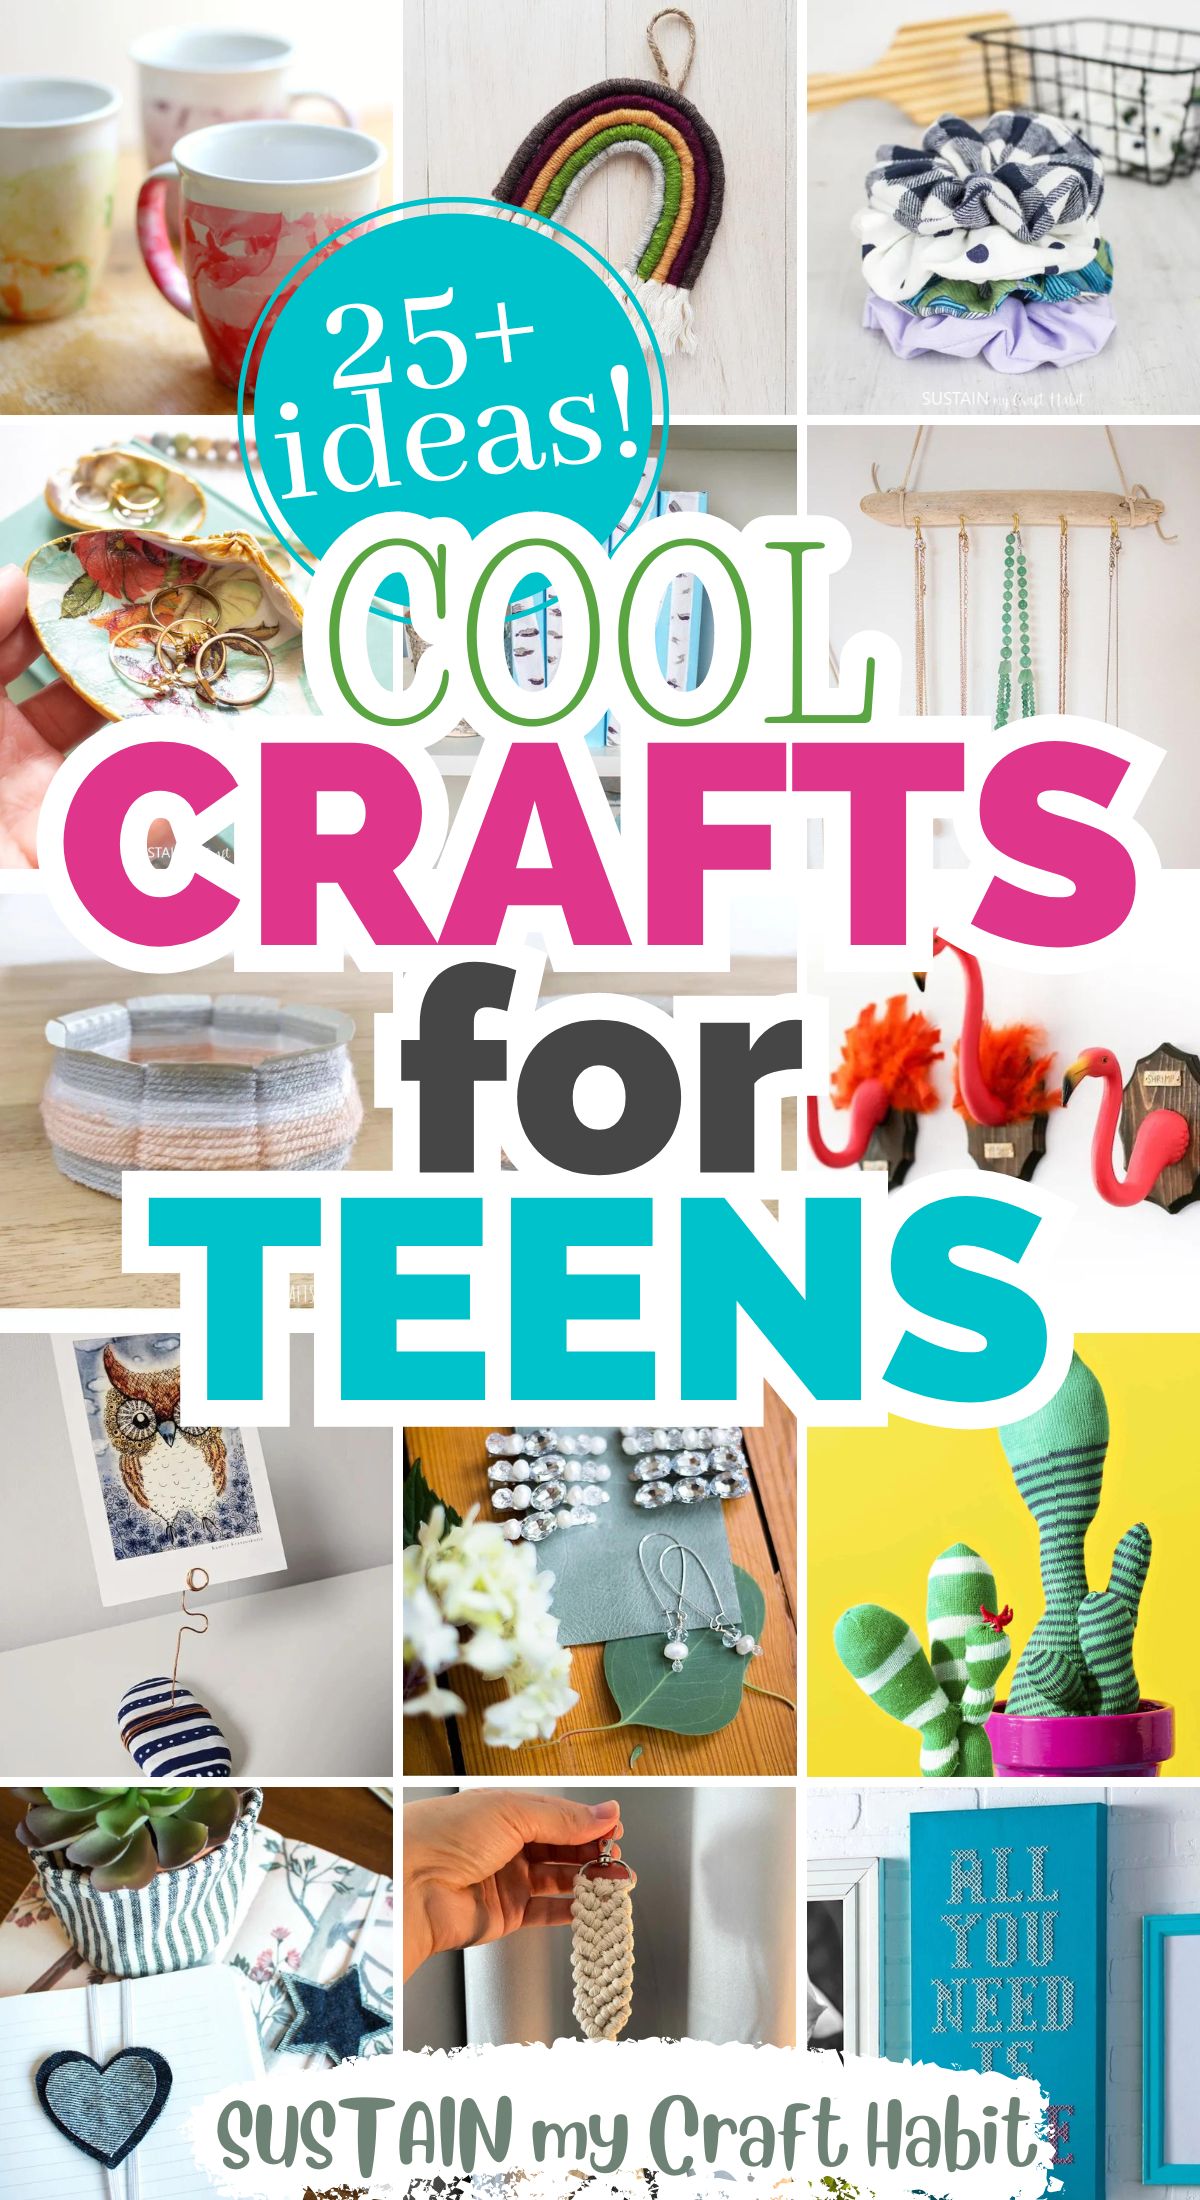 Collage of arts and crafts ideas for teenagers to make including painted mugs, macrame, bookmarks and more.